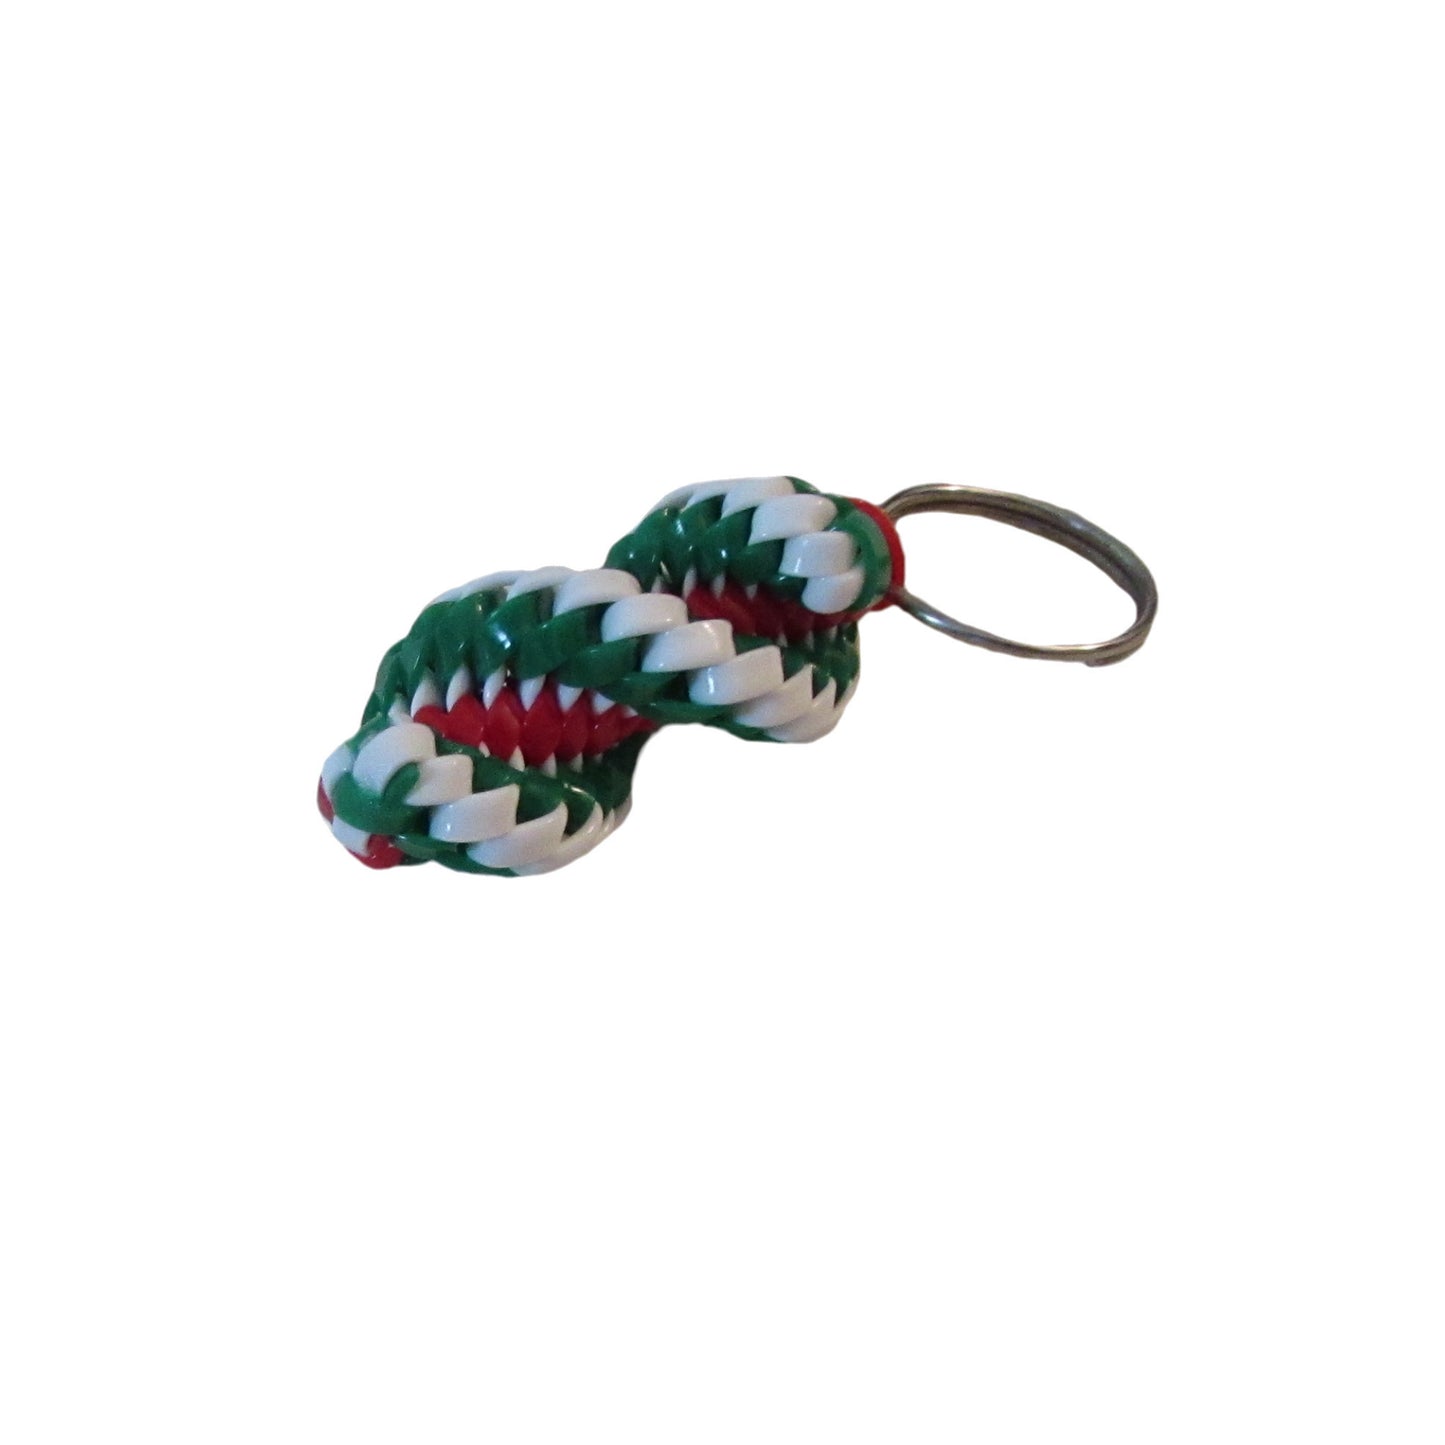 Small Red Green White Plastic Lacing Key Chain Right view